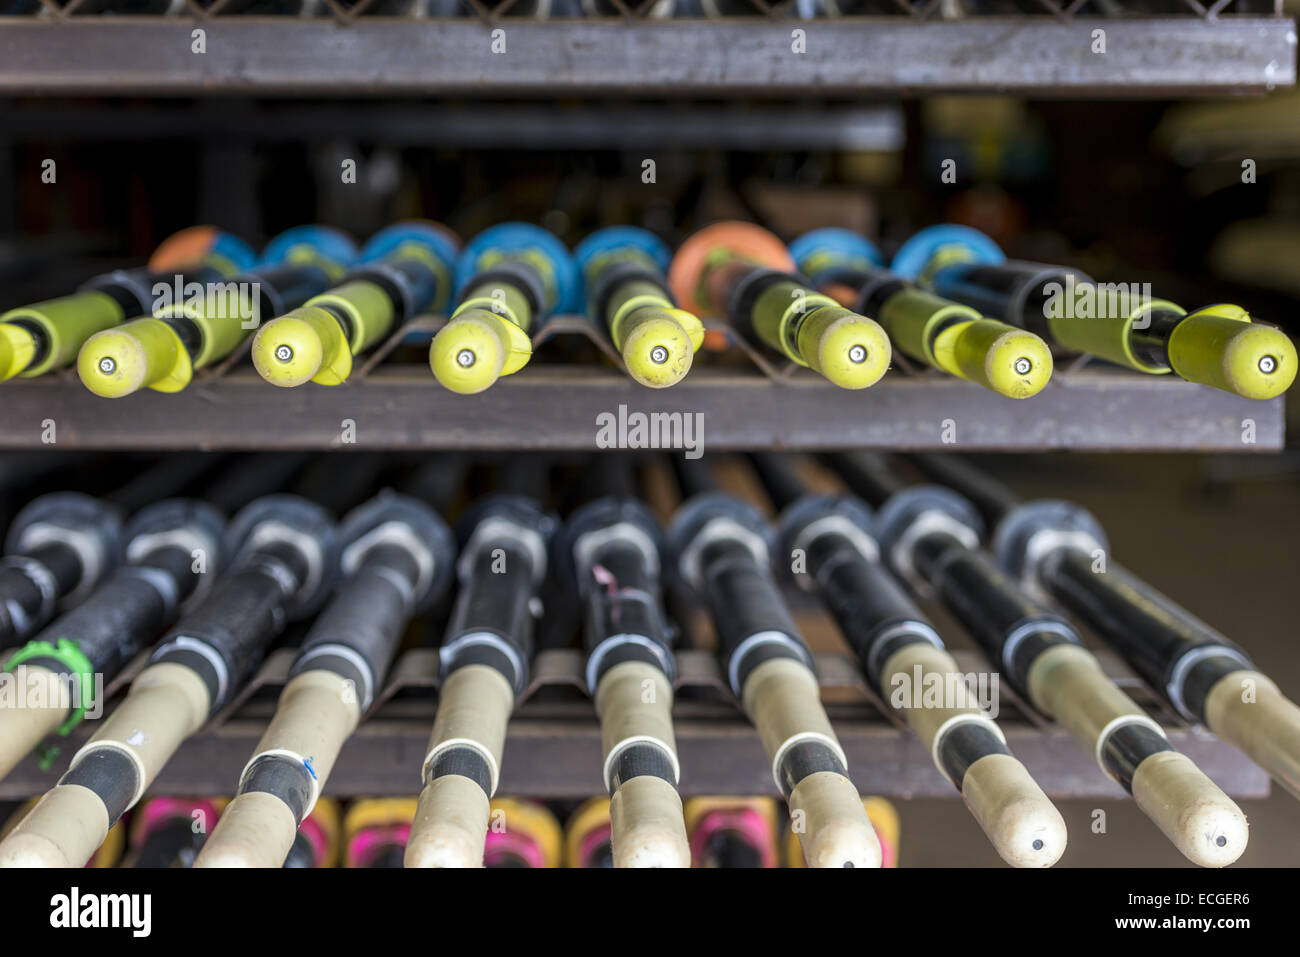 Oxford University is famous for rowing. Inside Wadham College boathouse is a selection of oars and boats used by the students. Stock Photo